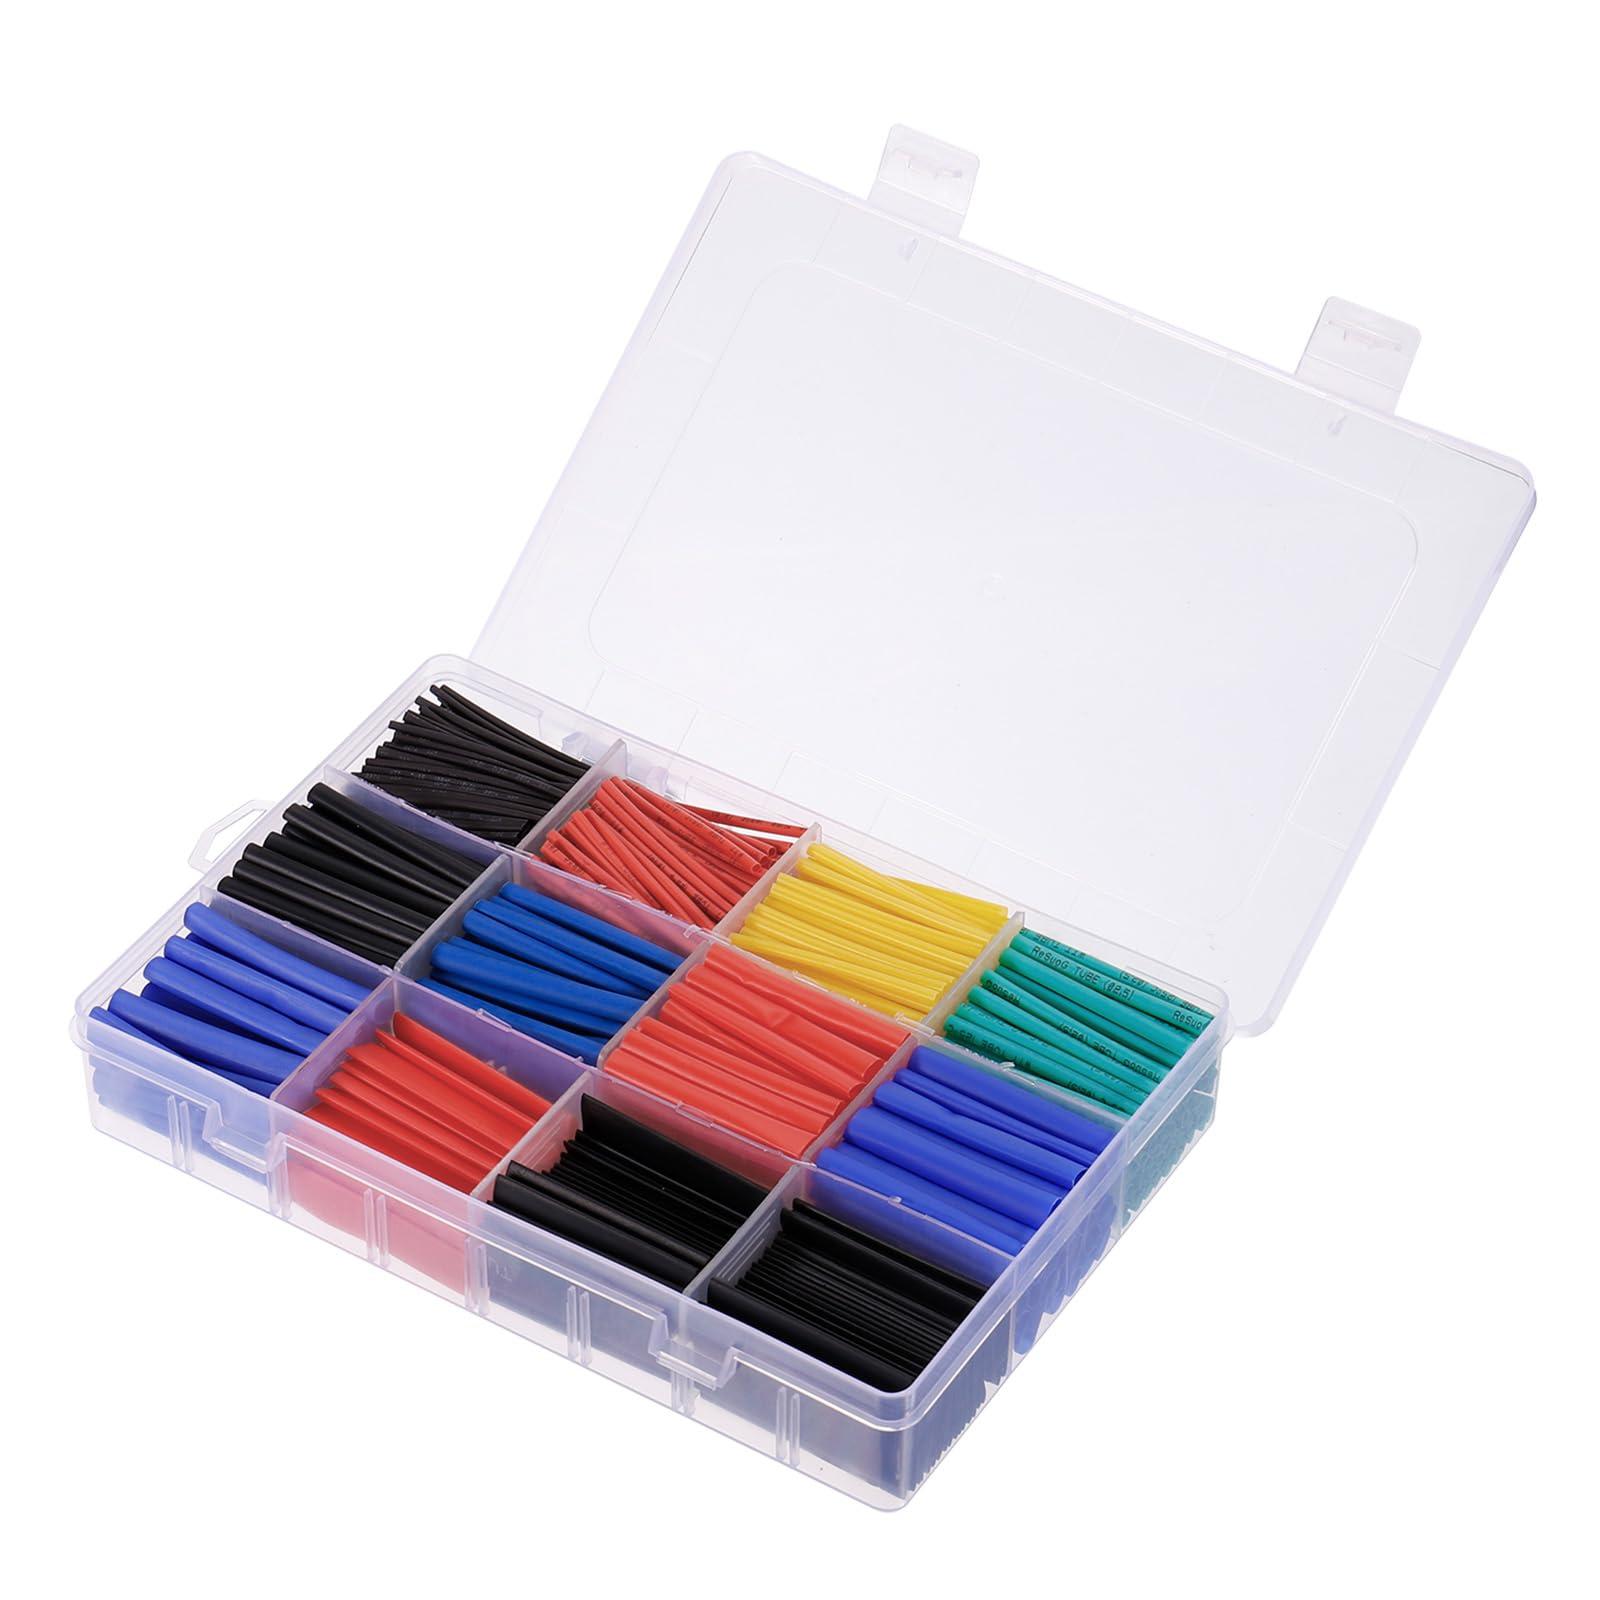 sourcing map 800pcs Heat Shrink Tubing Kit 2:1 Heat Shrink Tube 1mm/1.5mm/2mm/2.5mm/3mm/3.5mm/4mm/5mm/6mm/7mm/10mm/13mm for Electrical Cable Wire Wrap Sleeving